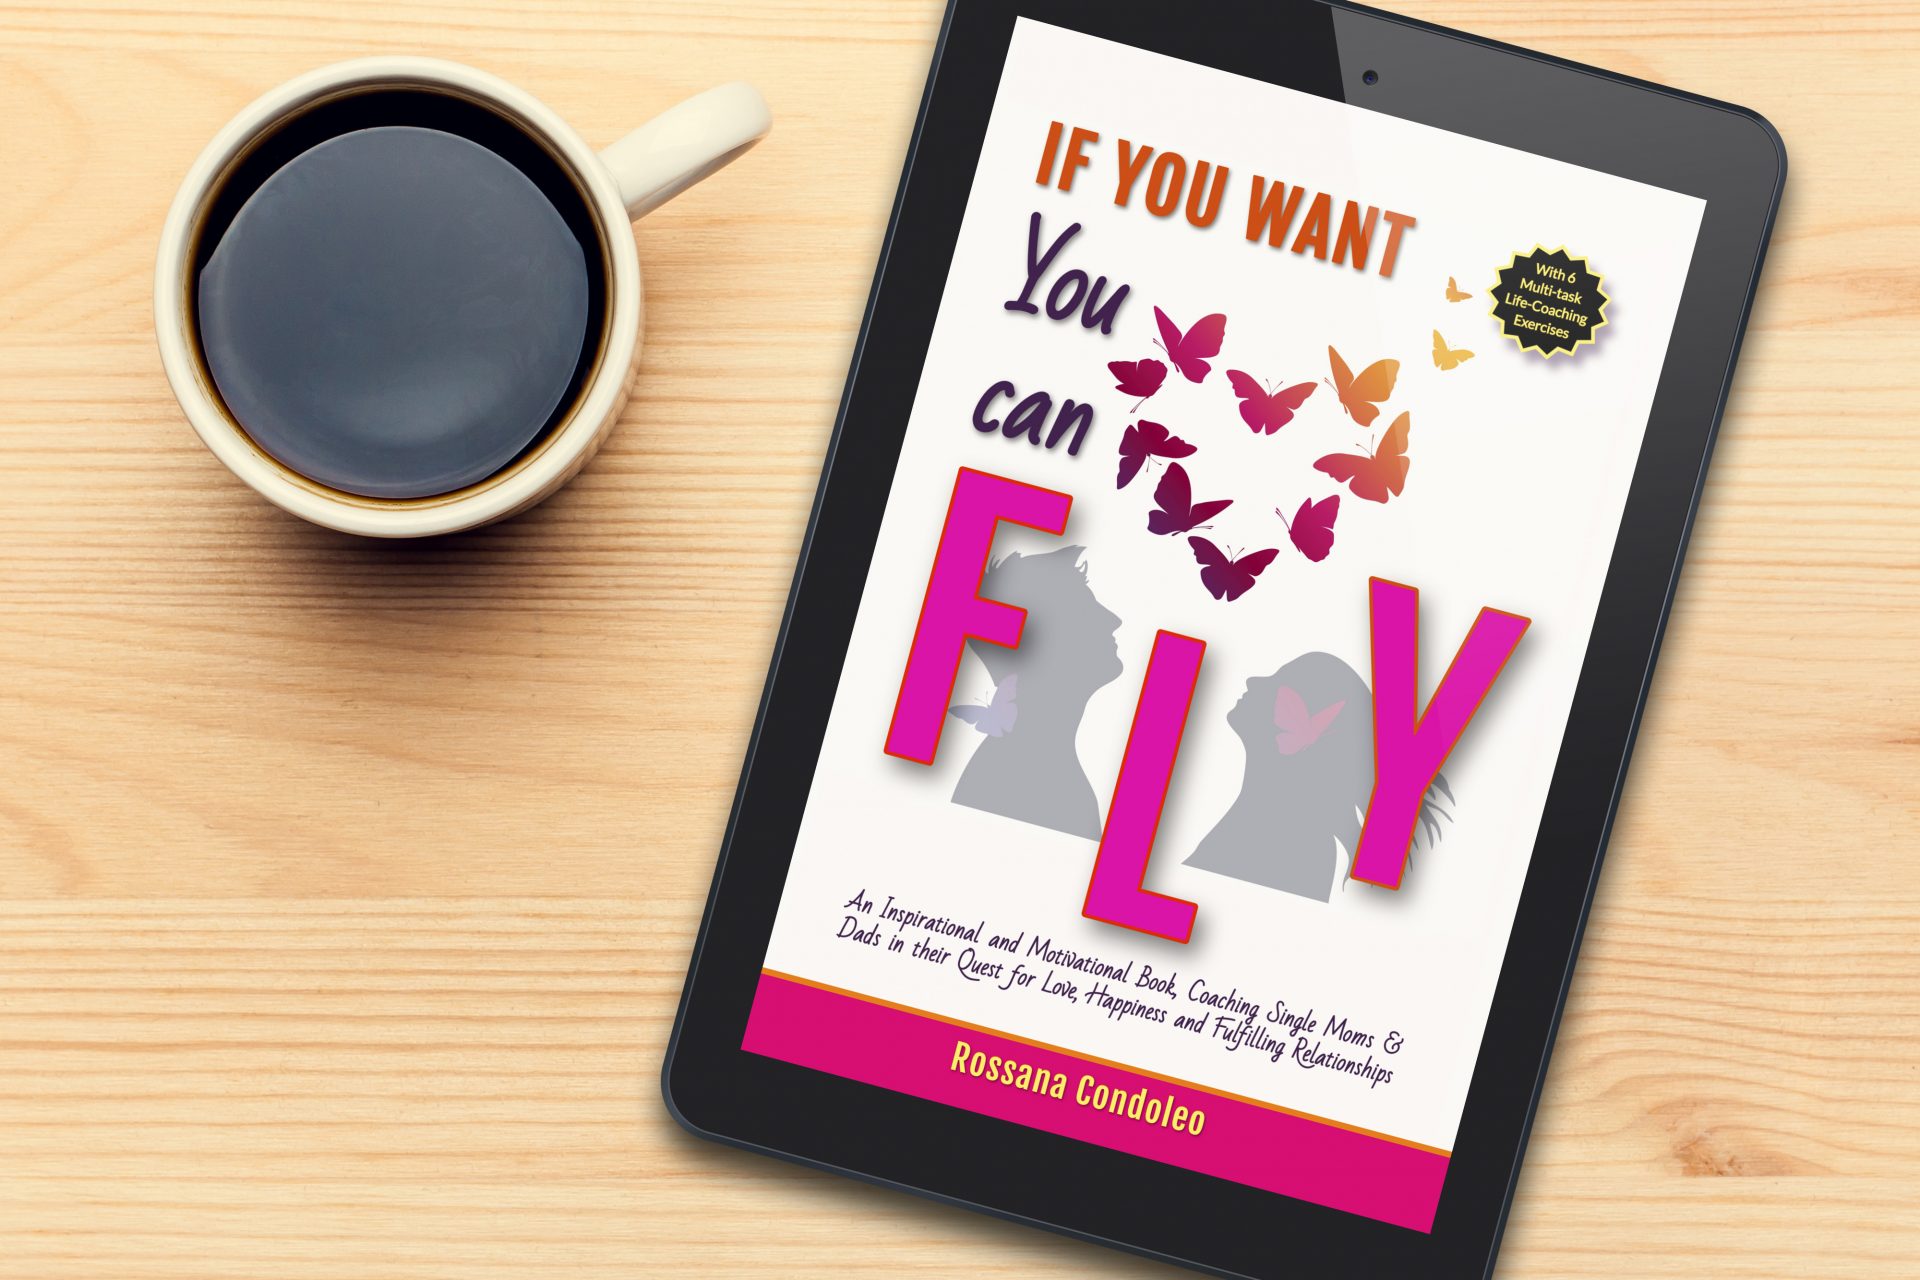 Single dad reading the ebook If You Want You Can Fly by Rossana Condoleo